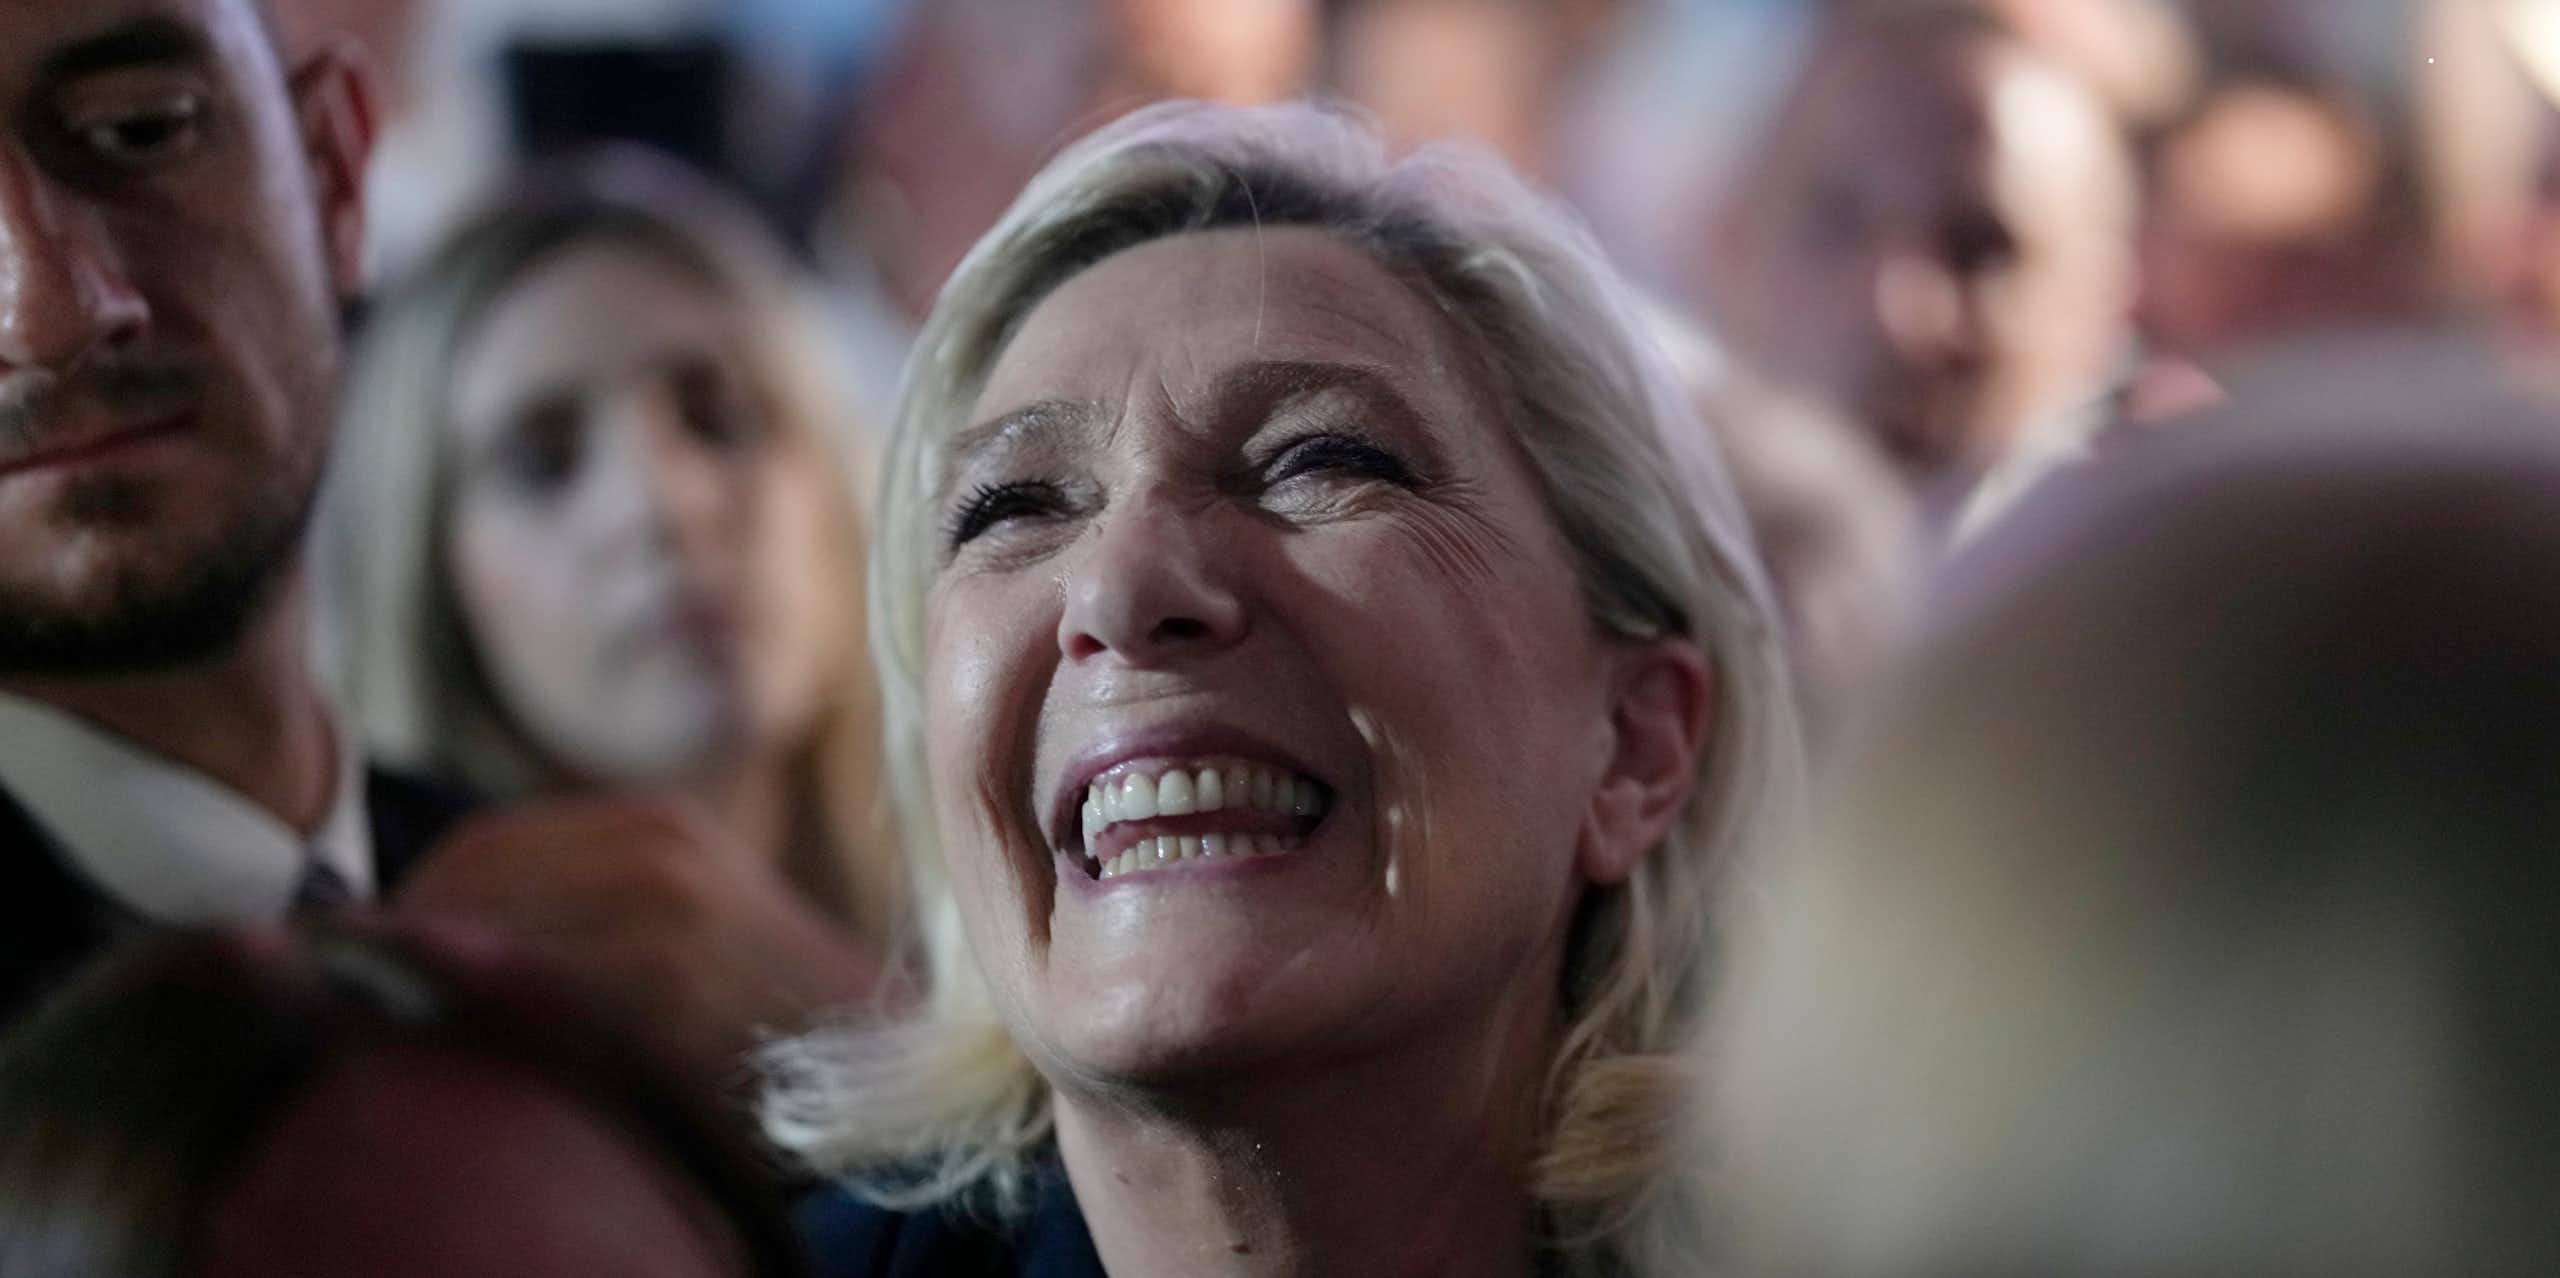 The far-right has surged to the lead in France’s elections. But forming a government remains a tall order